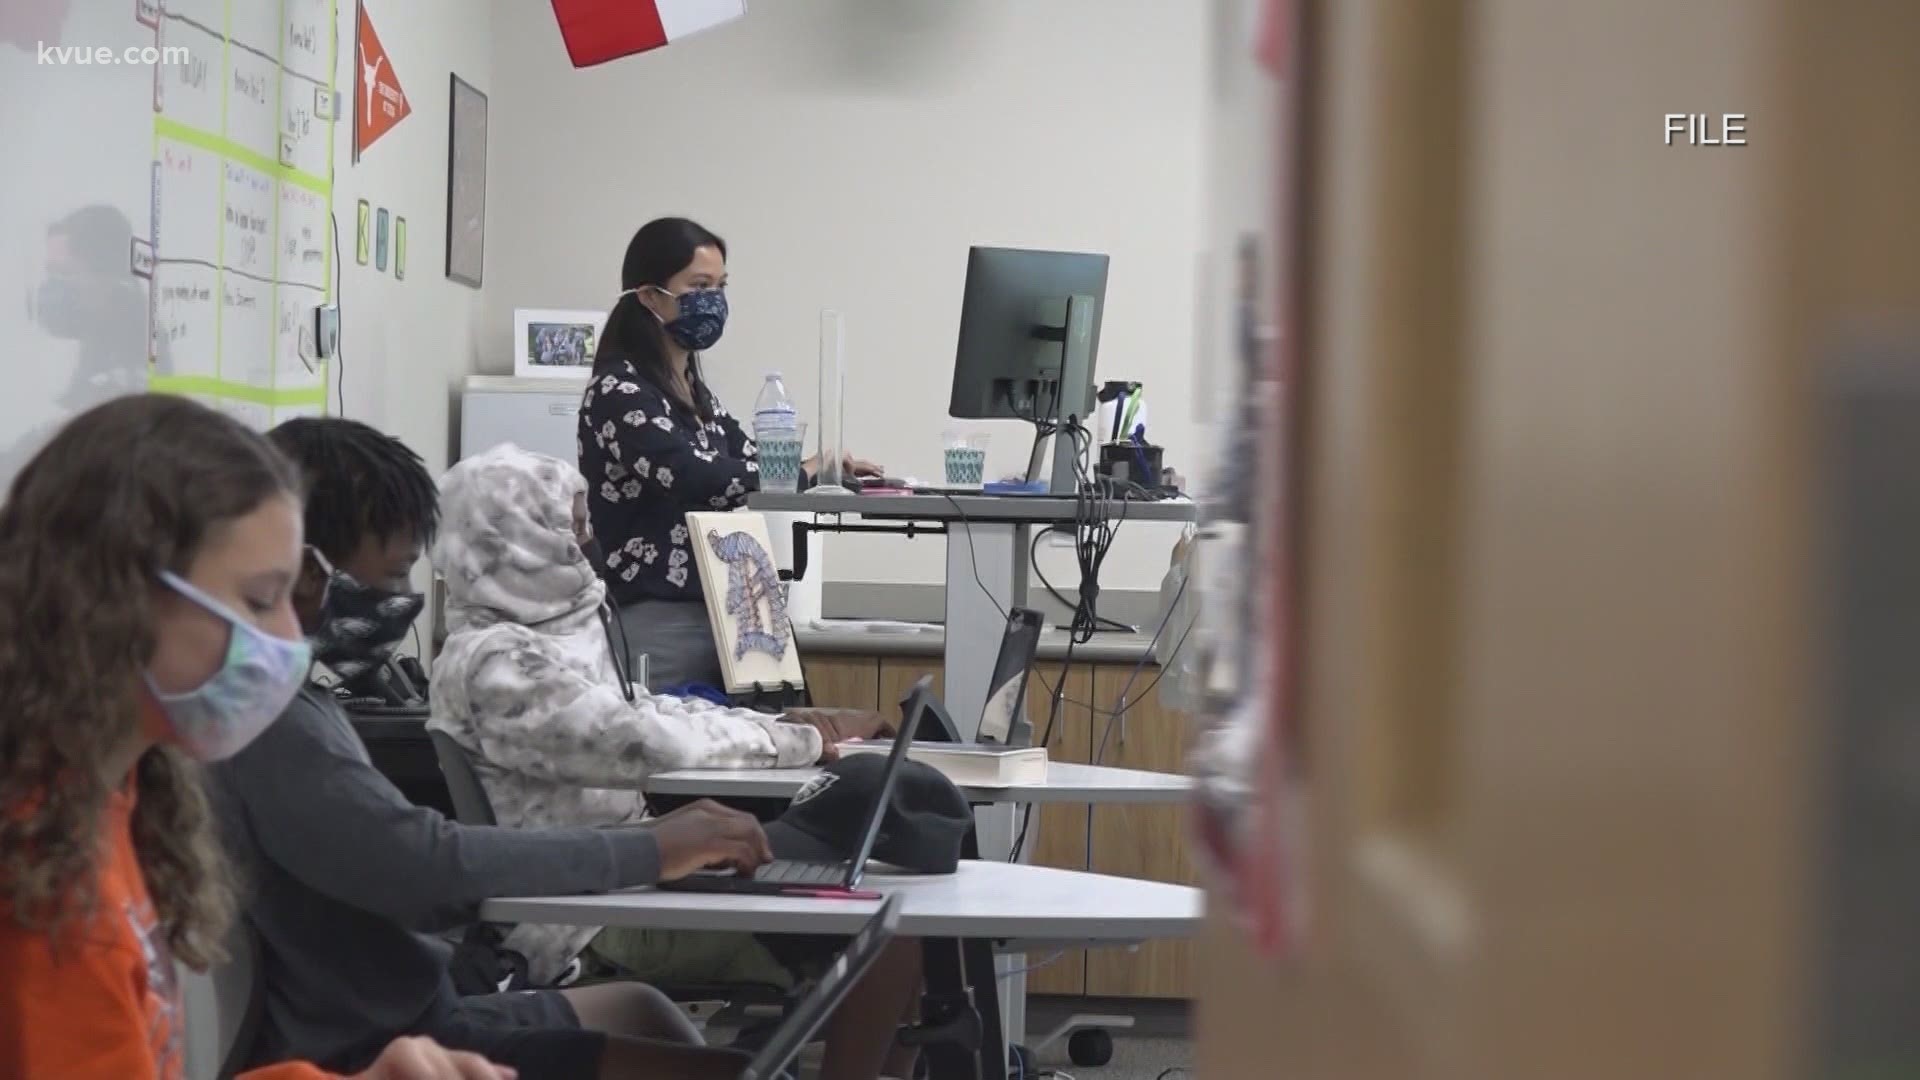 As the district makes plans for next semester, some teachers and staff are pushing back after the district denied their medical accommodations.